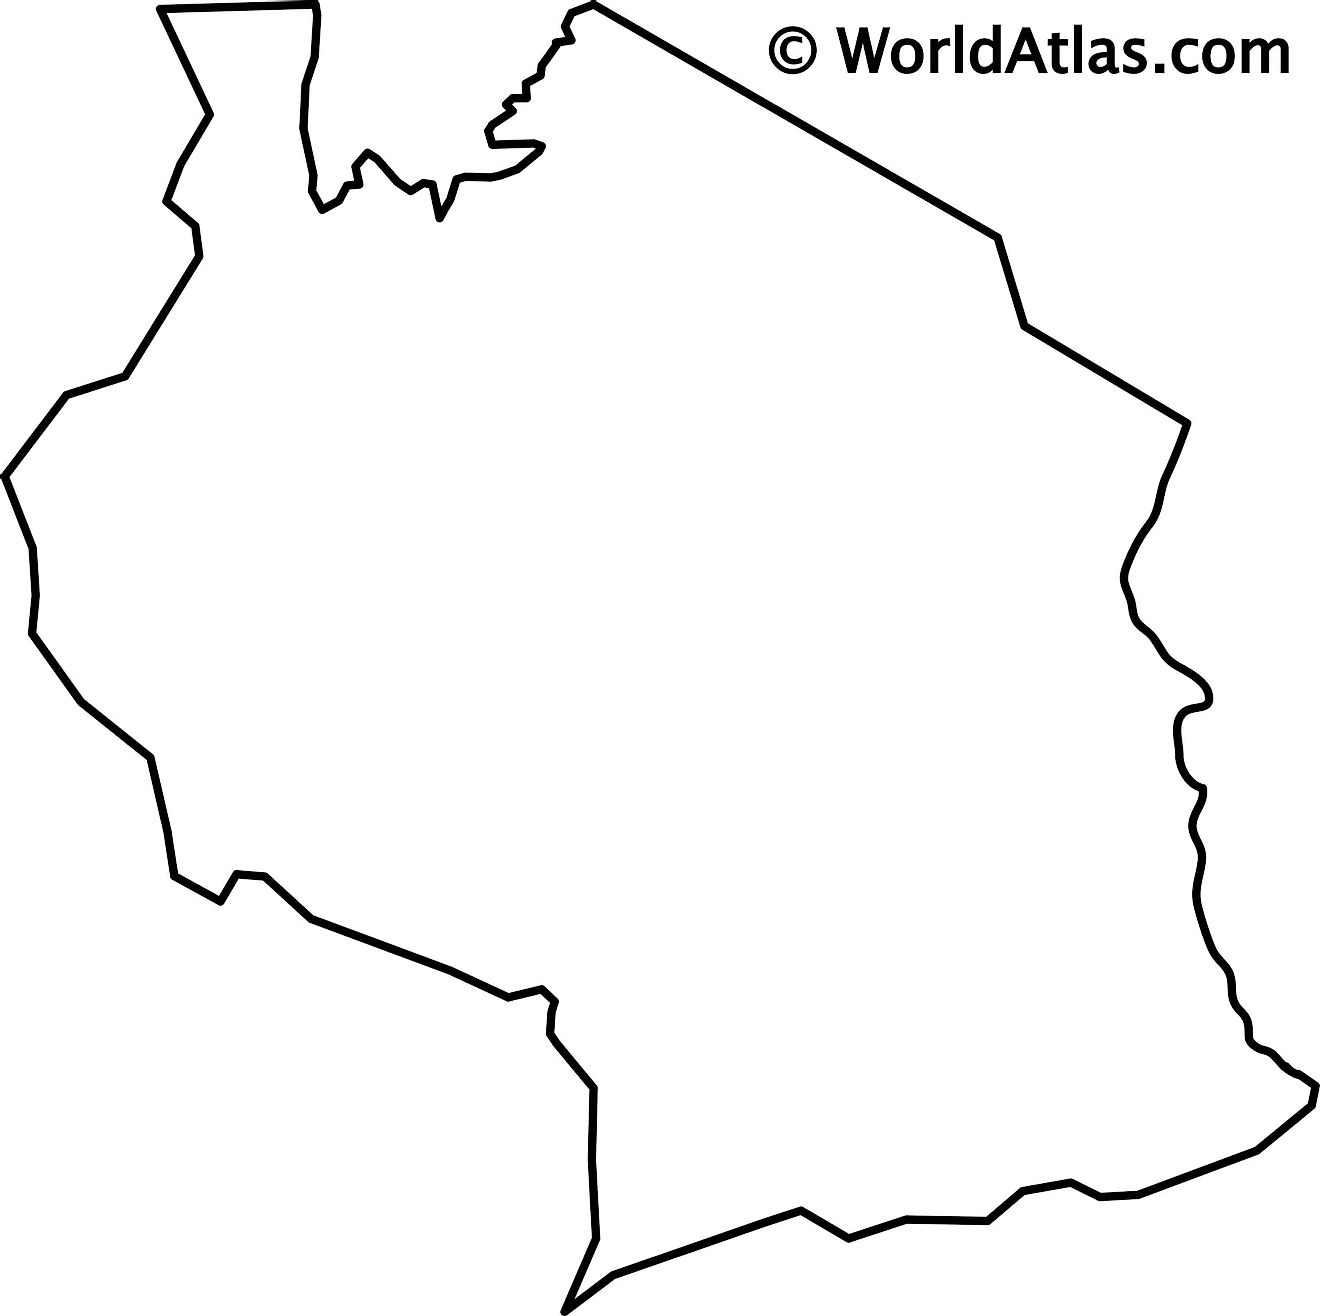 Blank Outline Map of Tanzania